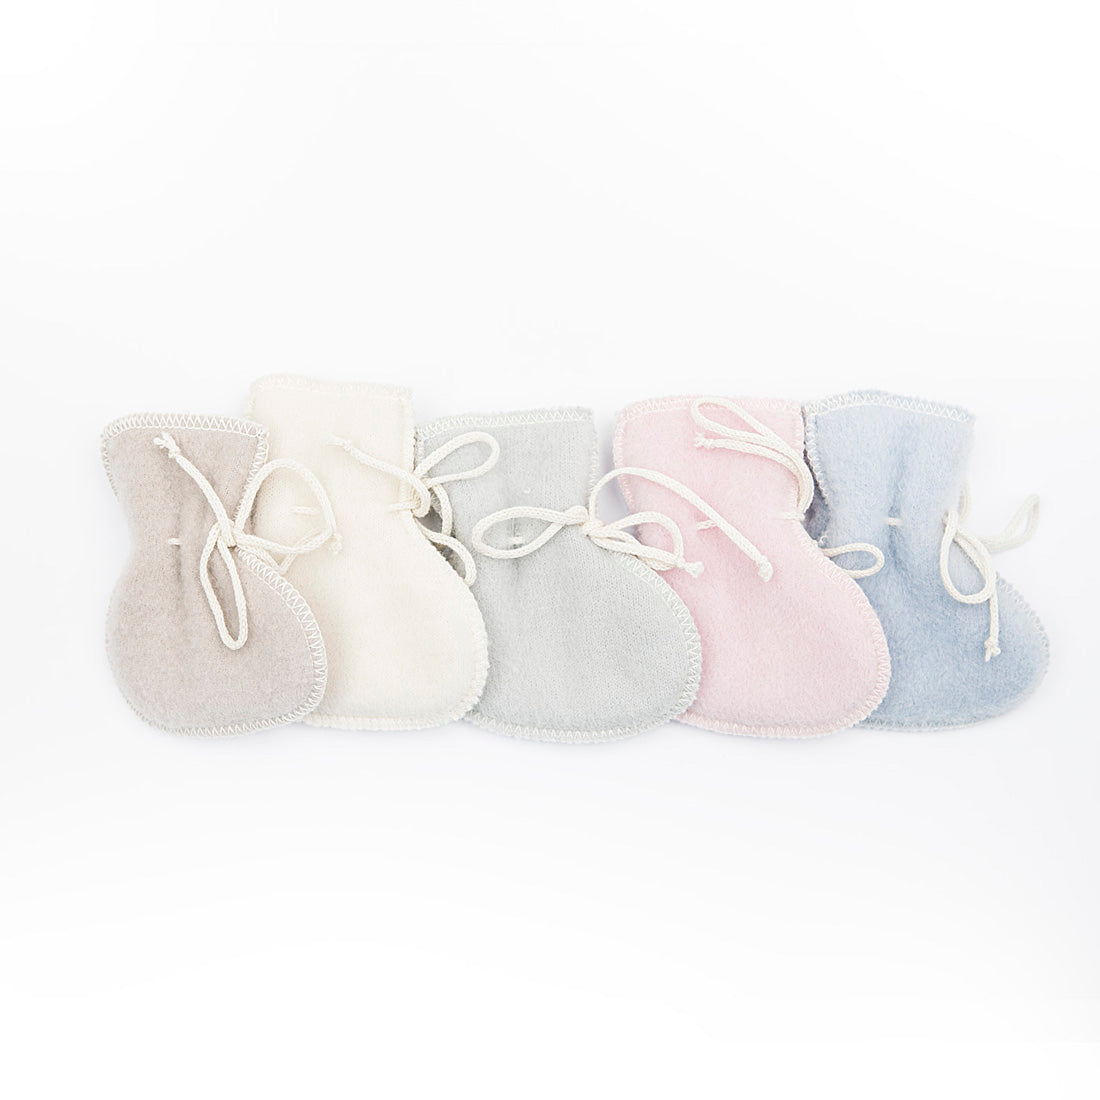 OUTLET LANACare Baby Booties in Organic Merino Wool